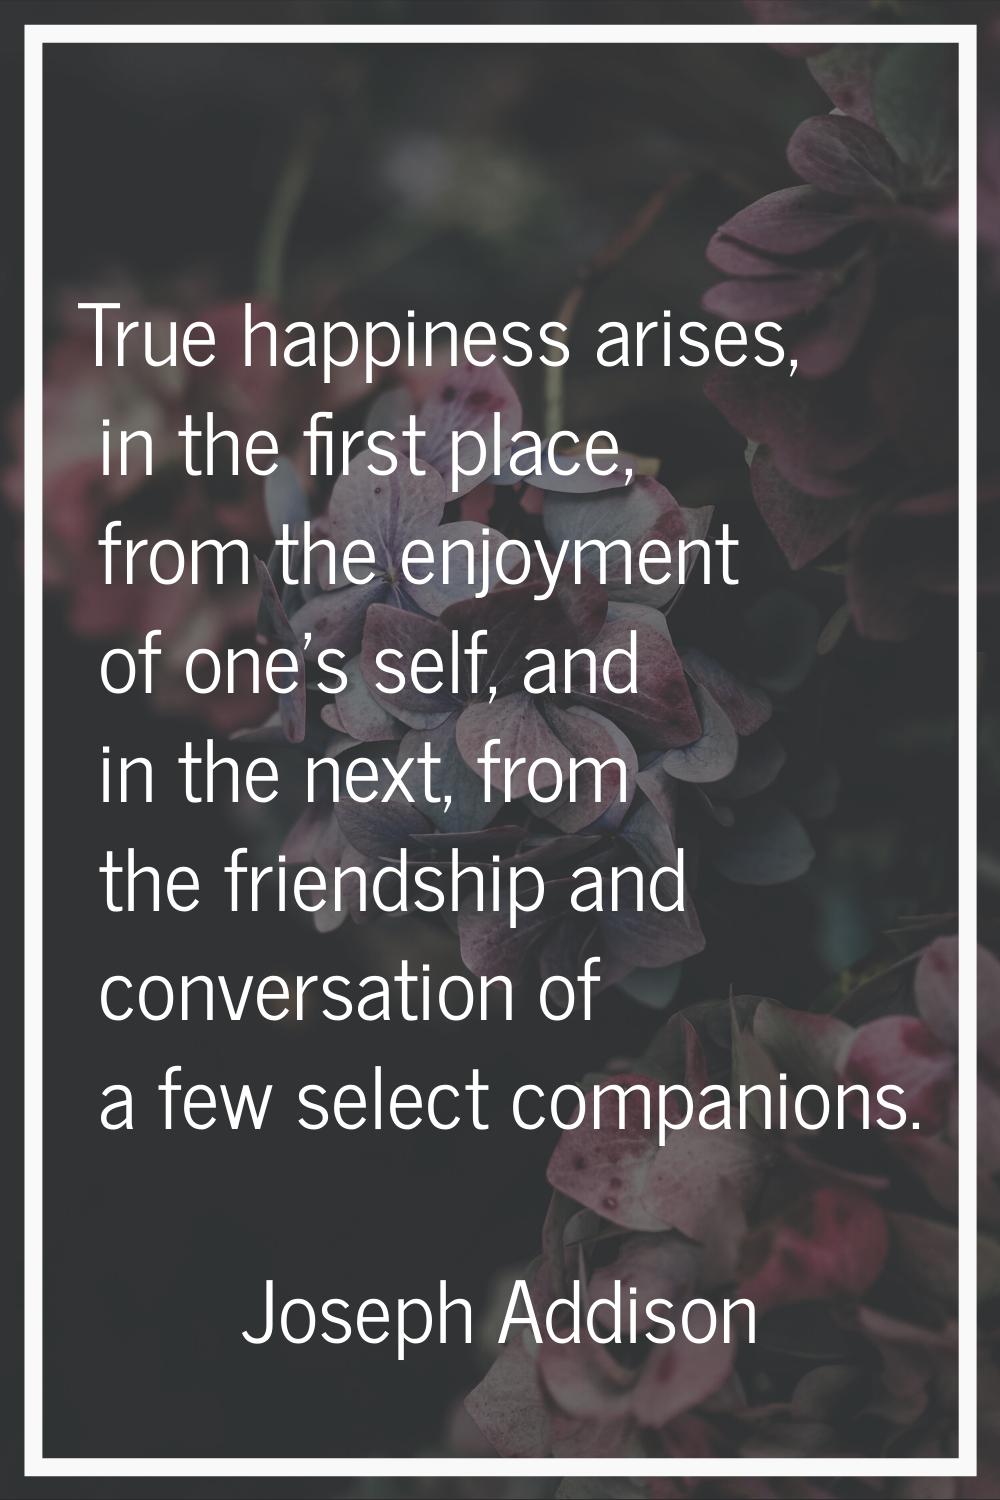 True happiness arises, in the first place, from the enjoyment of one's self, and in the next, from 